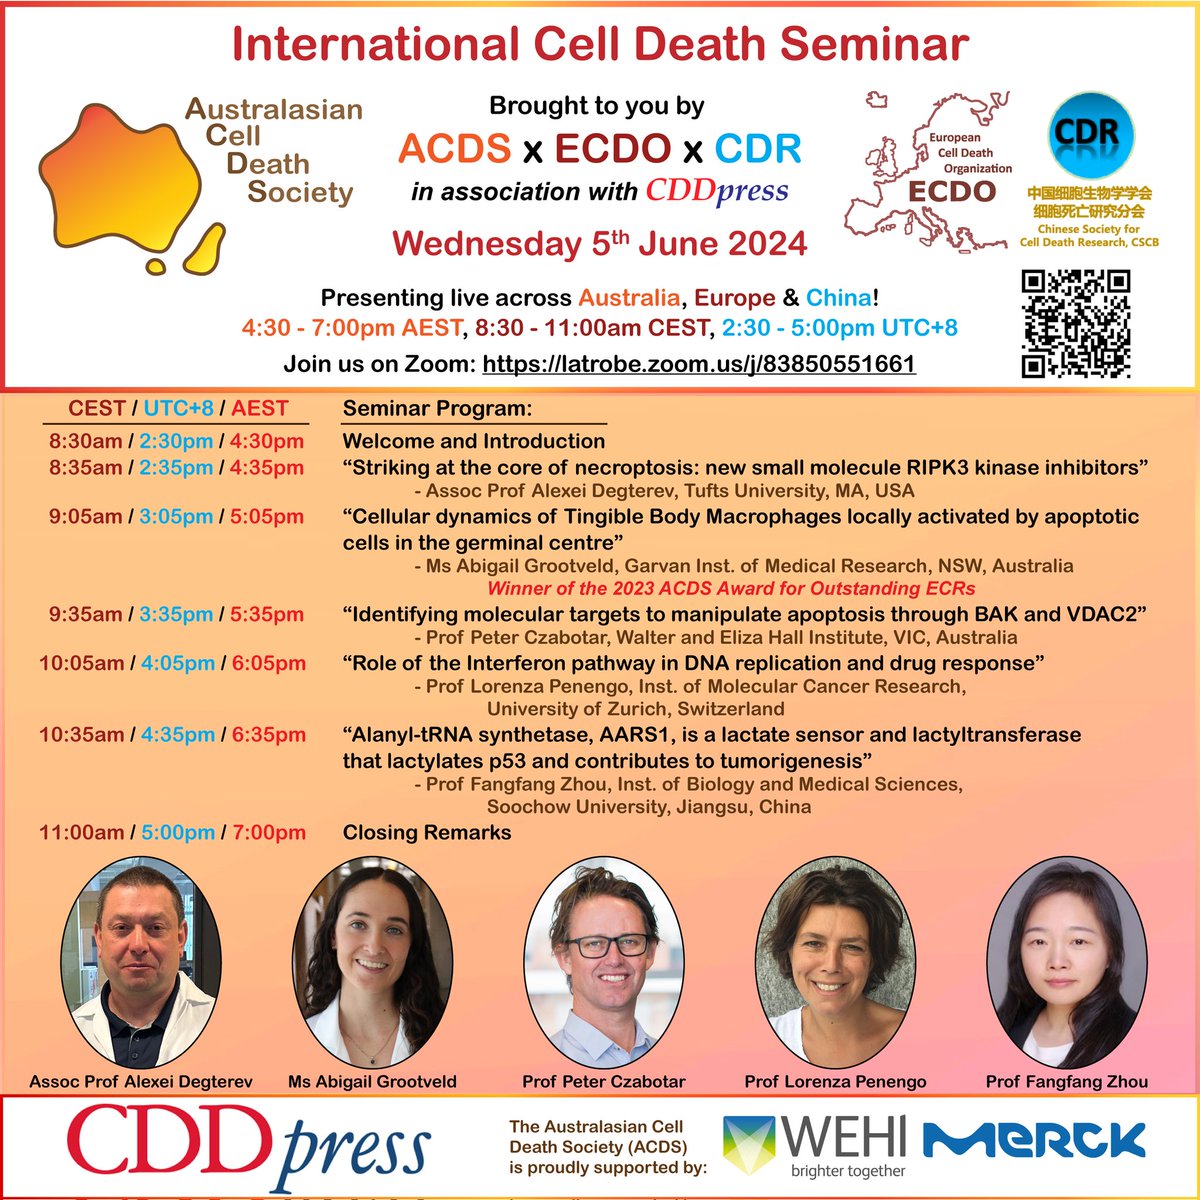 We're very pleased to announce that Prof Fangfang Zhou of Soochow University will be joining the stellar speaker line-up for our upcoming International Cell Death Seminar! 🤩 Final program & meeting details below, & please note later finish time - All welcome, see you there! 😊